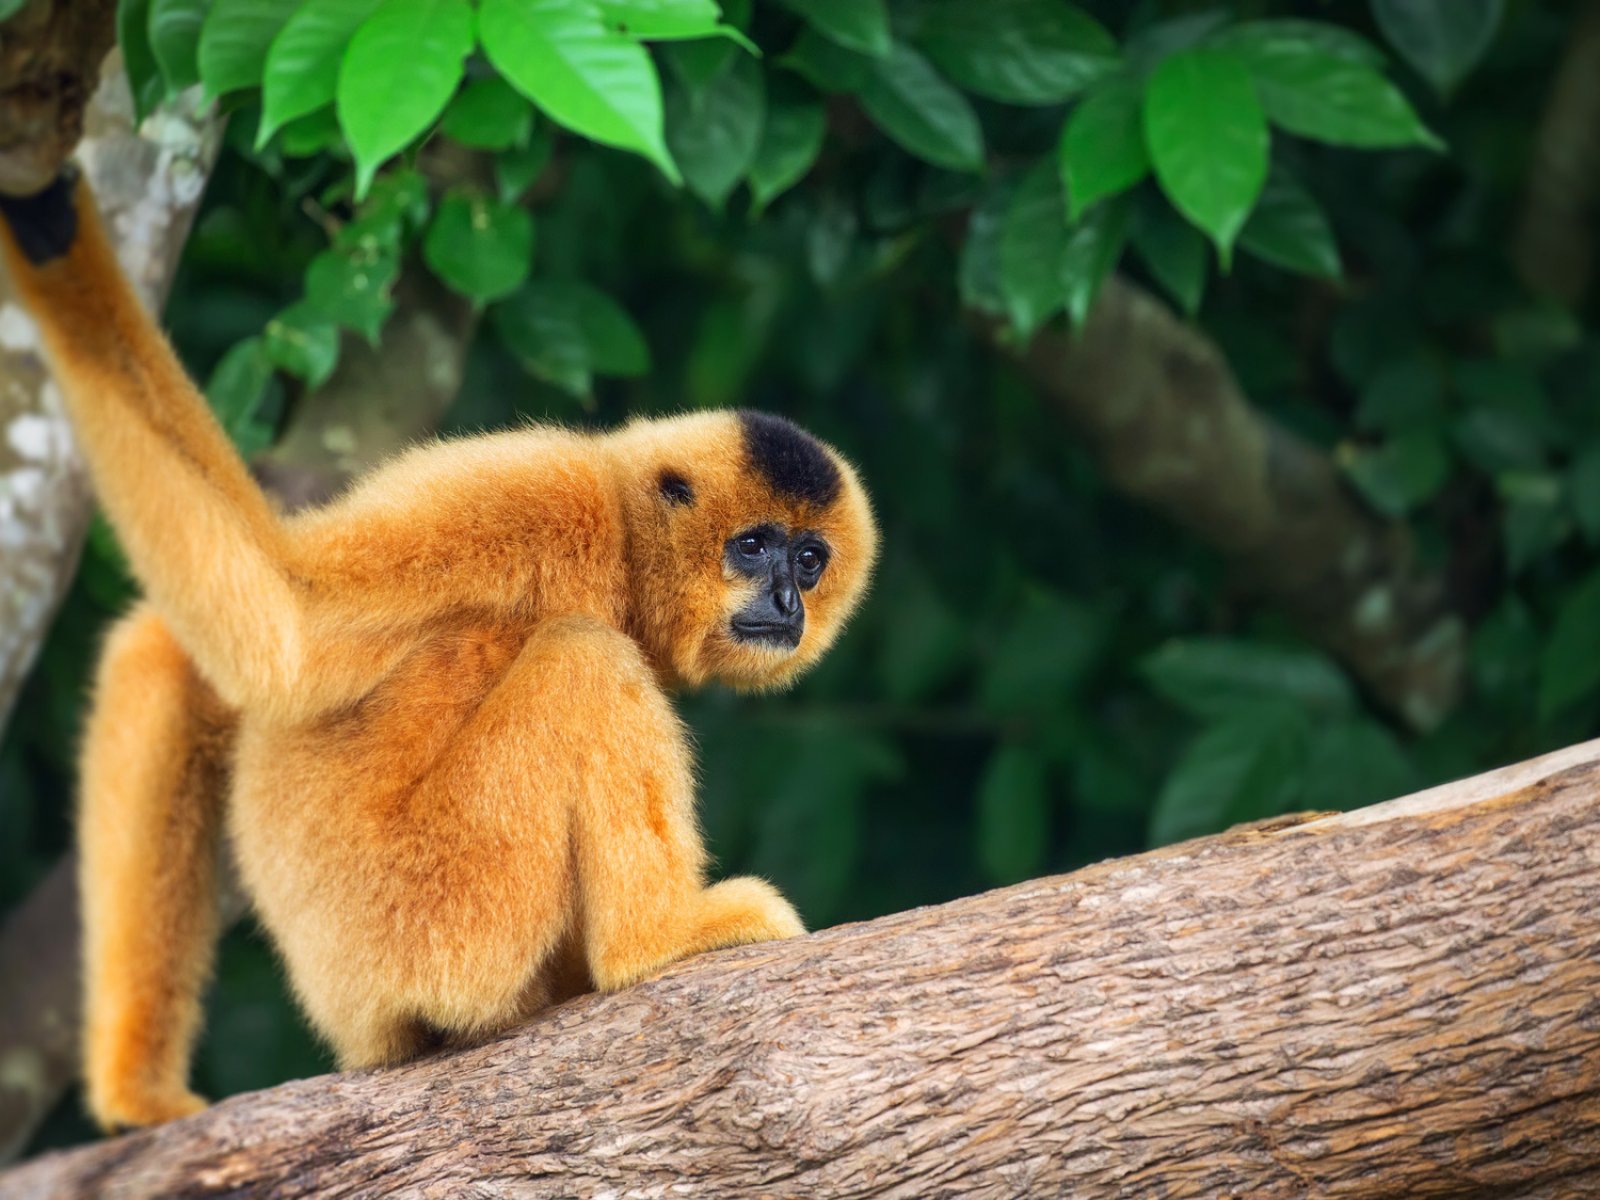 How to look After Gibbons in Phuket